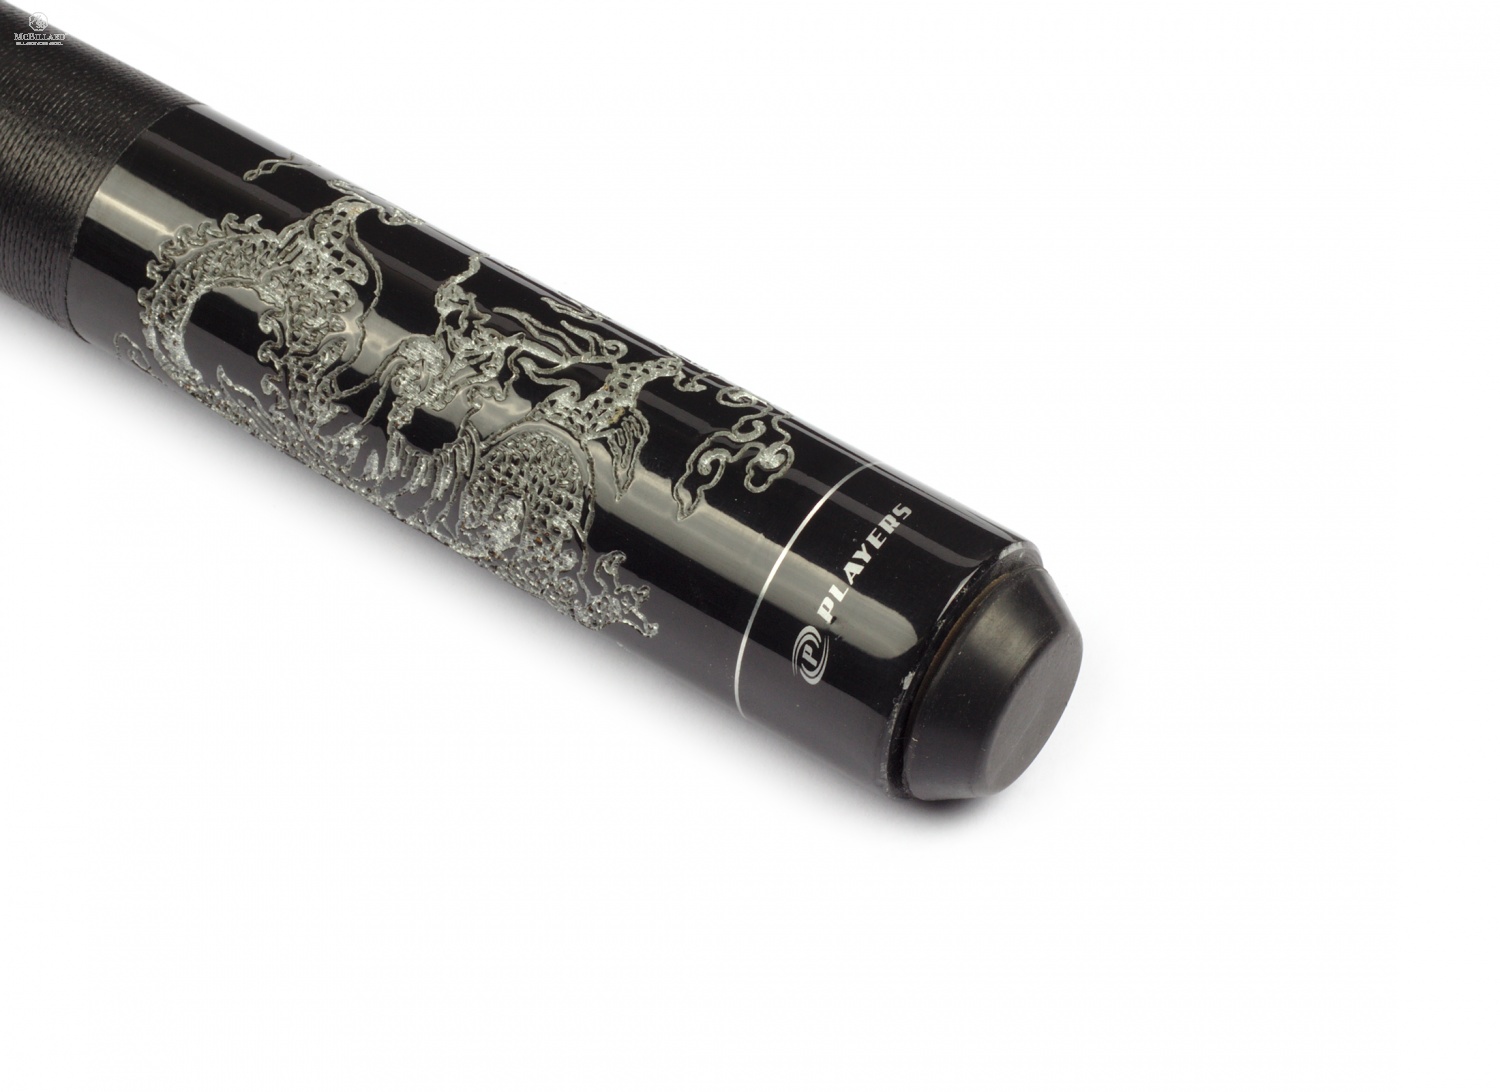 Players DLDG Black with White Dragons Pool Cue